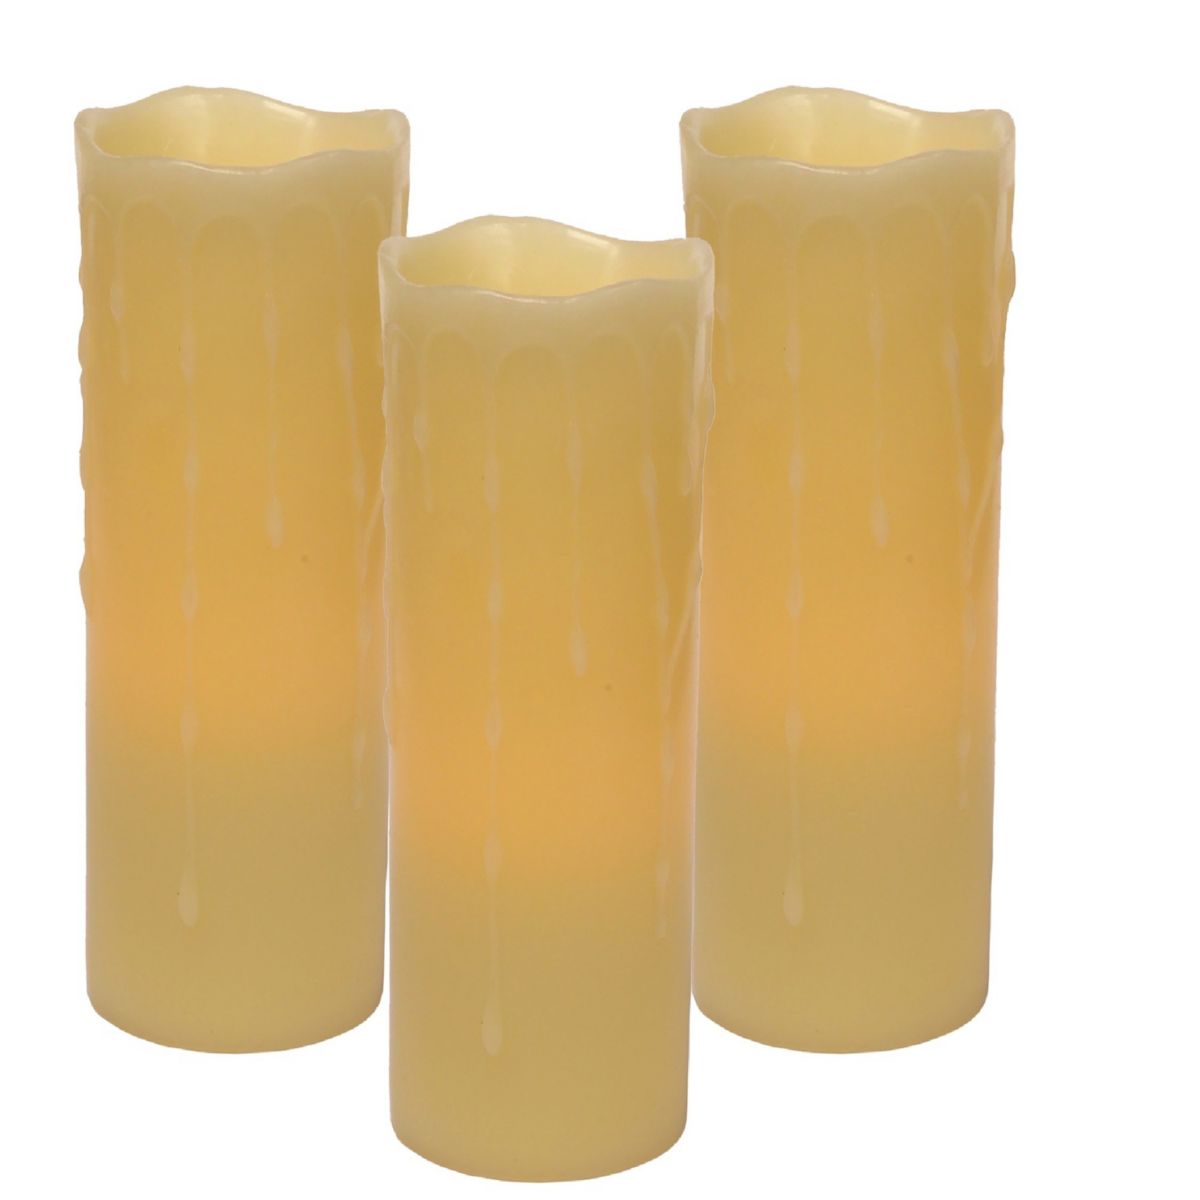 LED Dripping Wax Pillar Candles with Remote (Set of 3) Slickblue